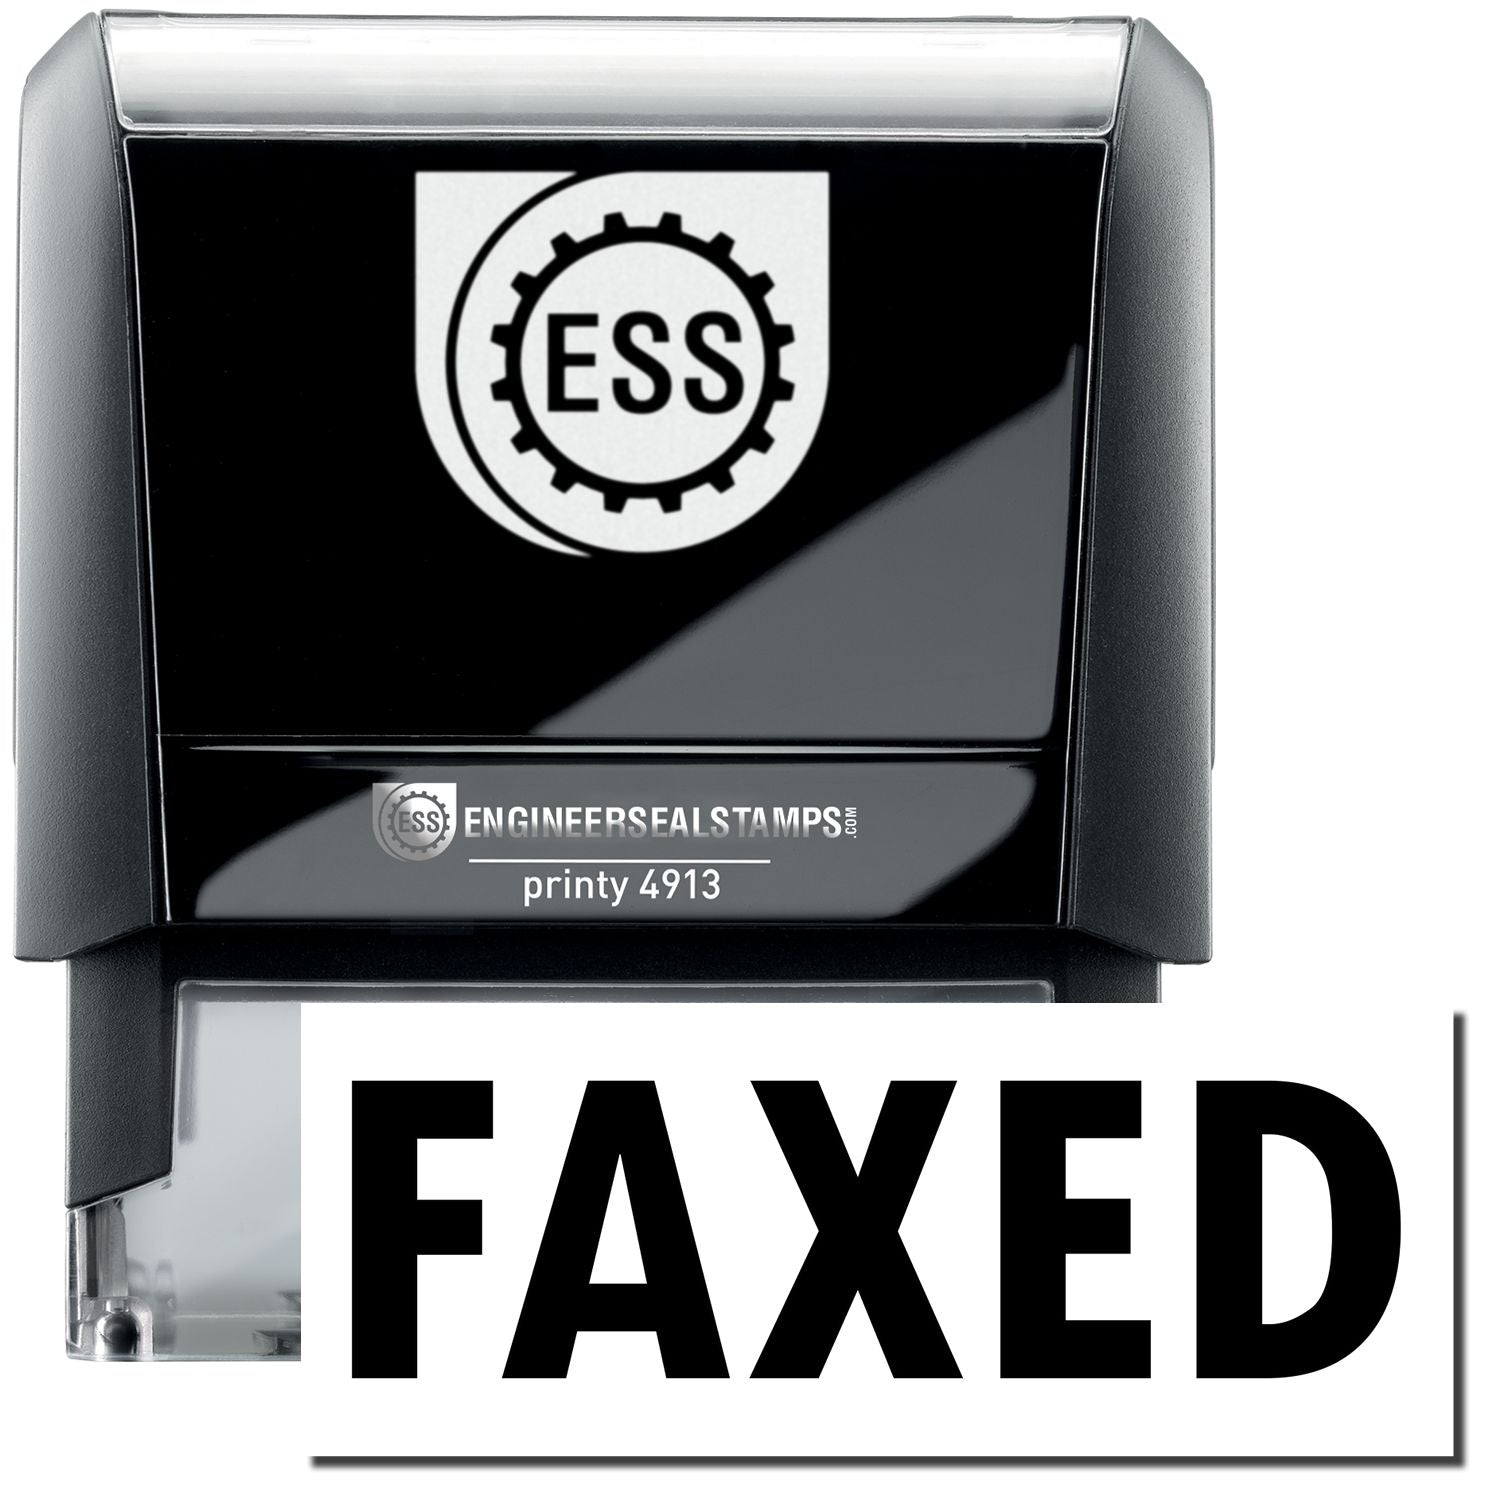 A self-inking stamp with a stamped image showing how the text "FAXED" in a large bold font is displayed by it.